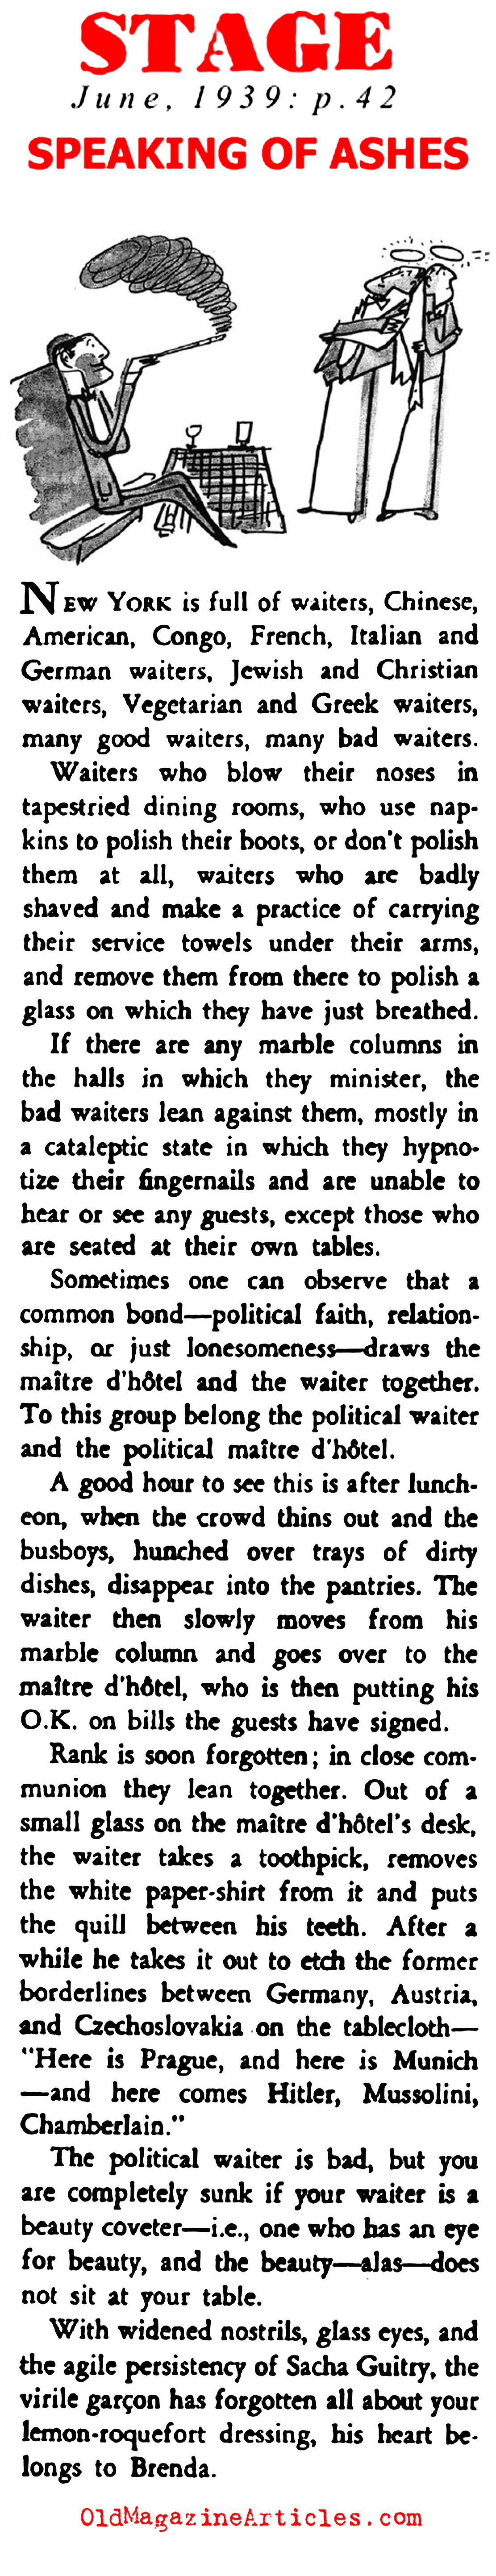 A Word on New York Waiters (Stage Magazine, 1939)